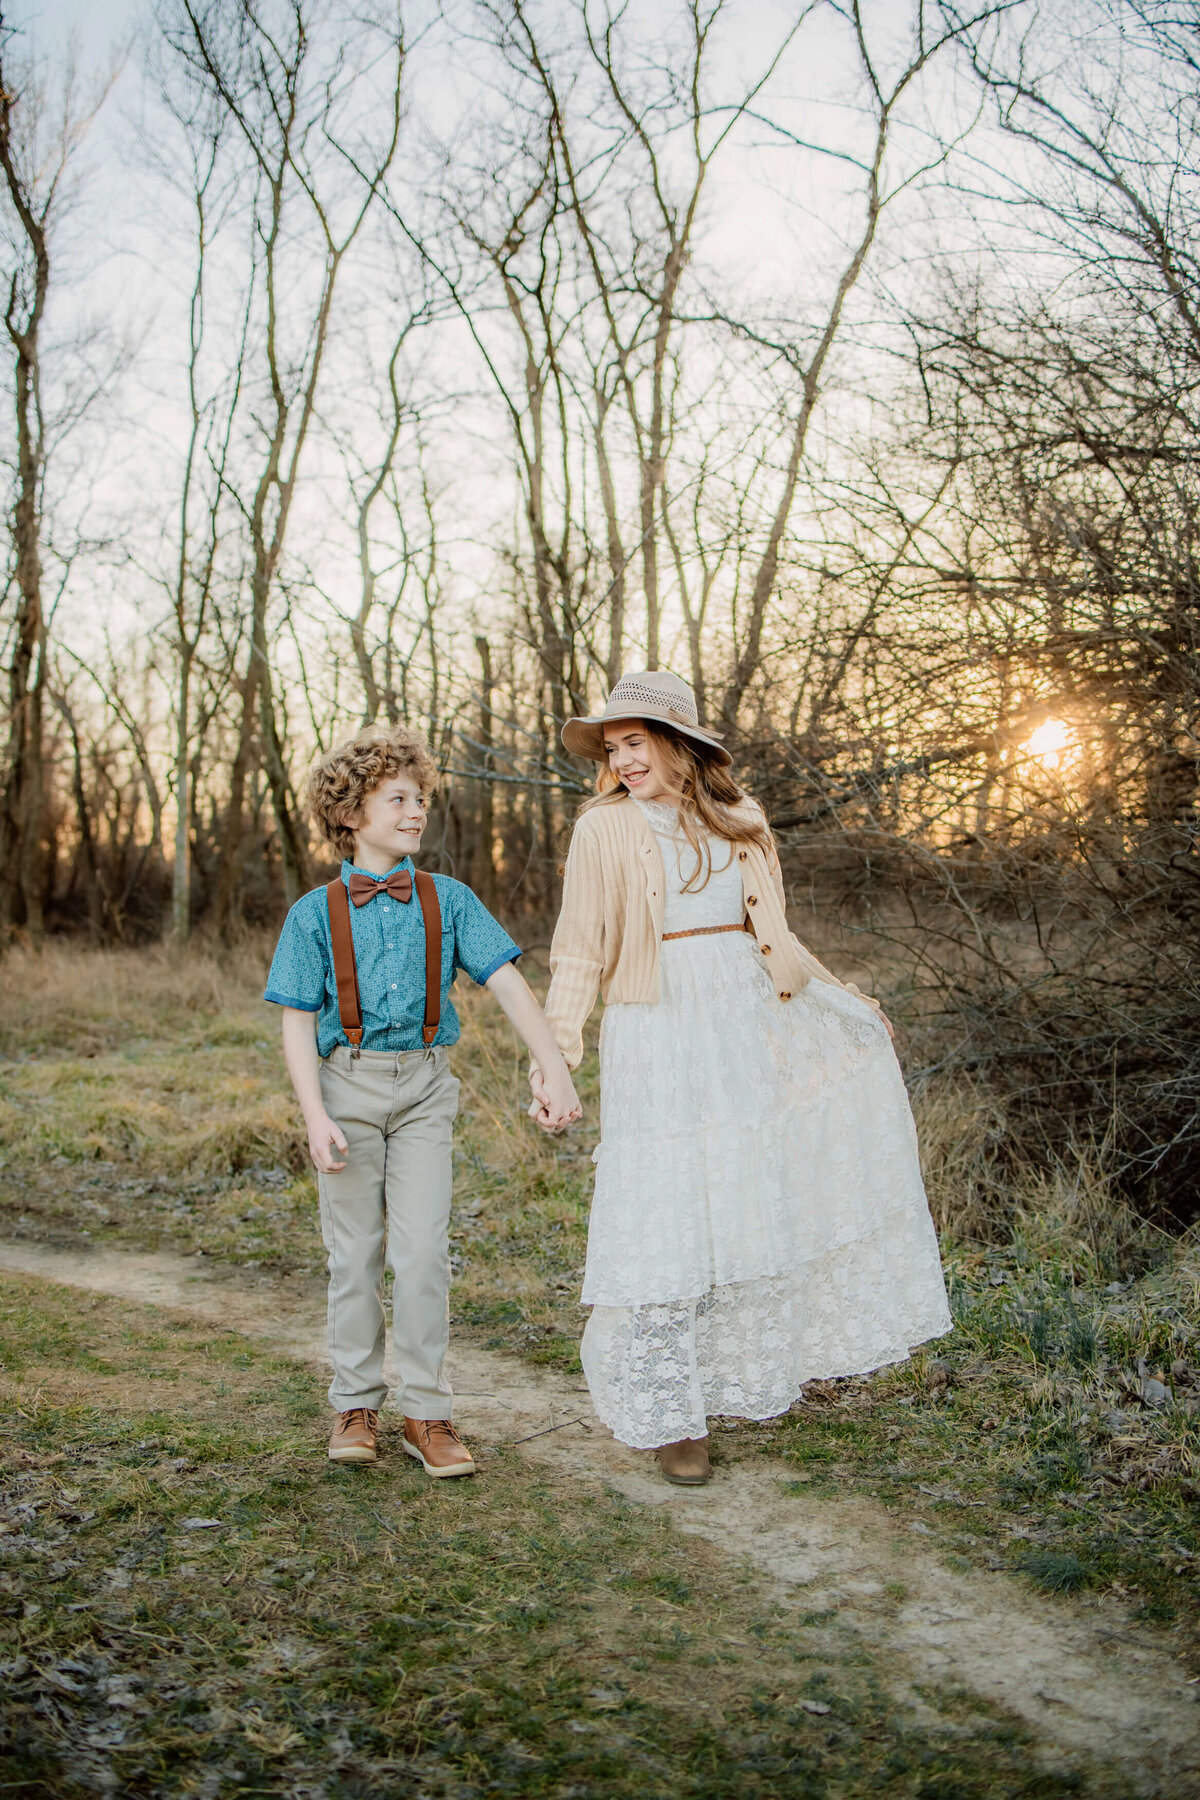 St. Louis Photographer captures a young boy and girl walking hand in hand at sunset.